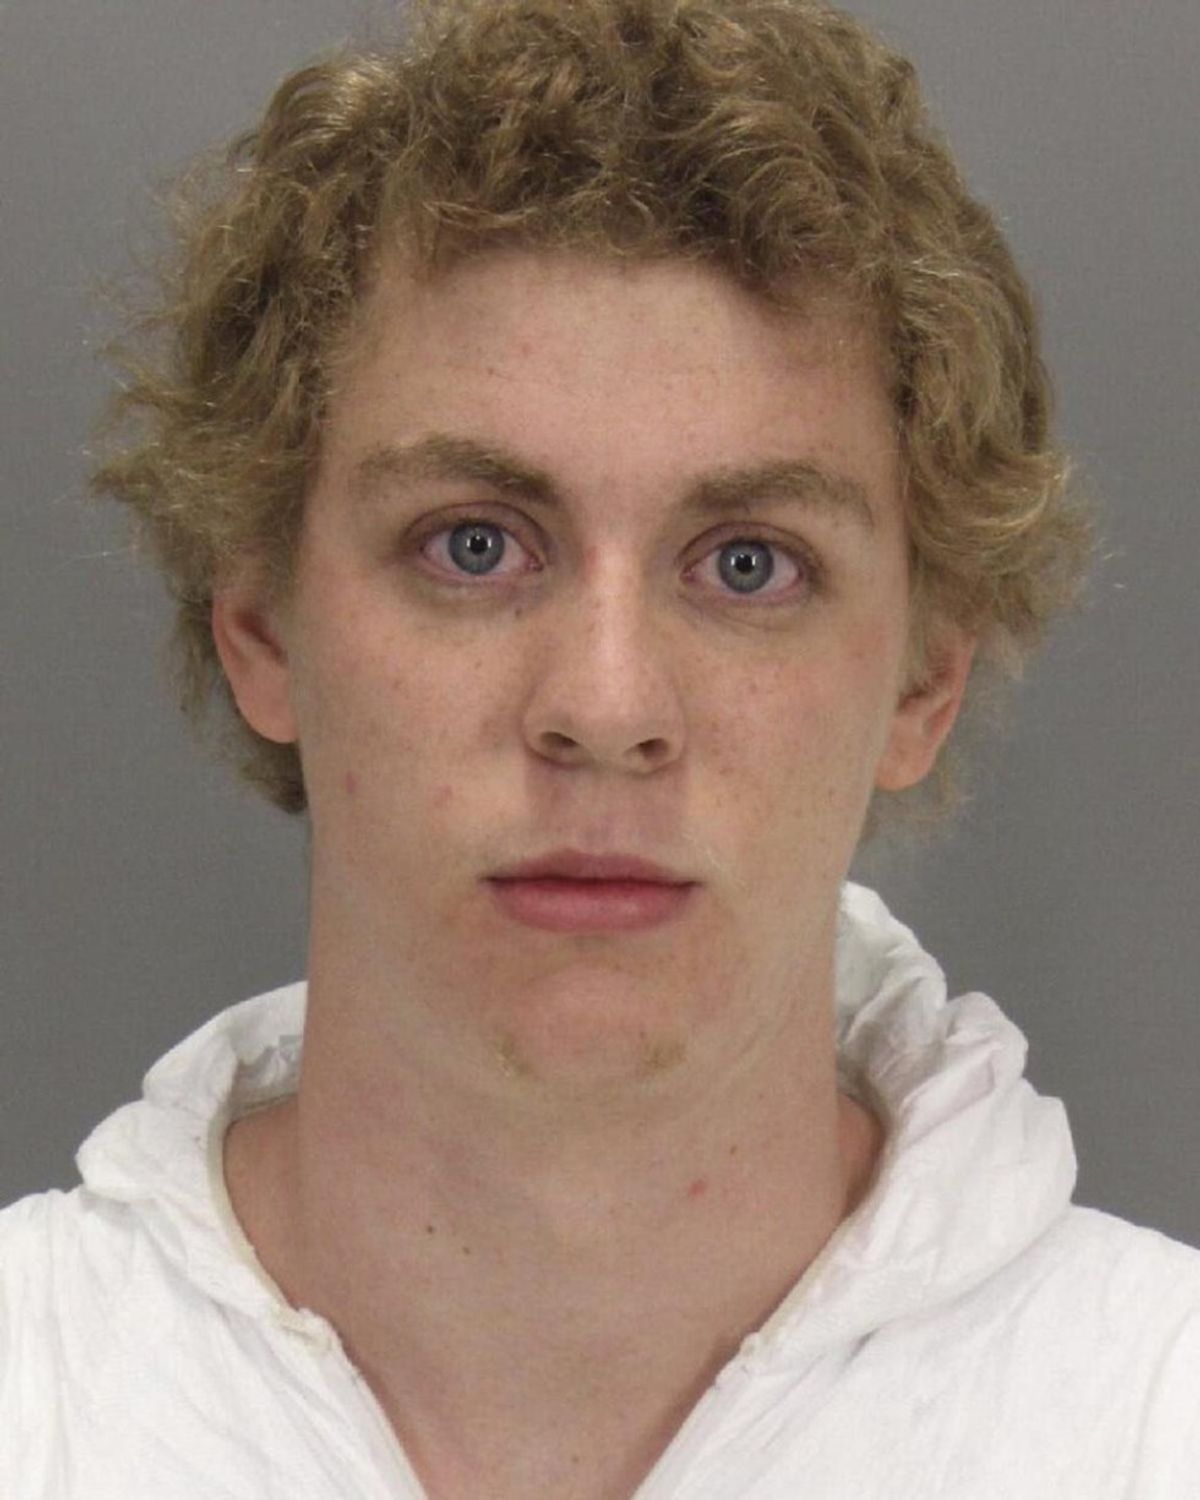 A letter To Brock Turner's father